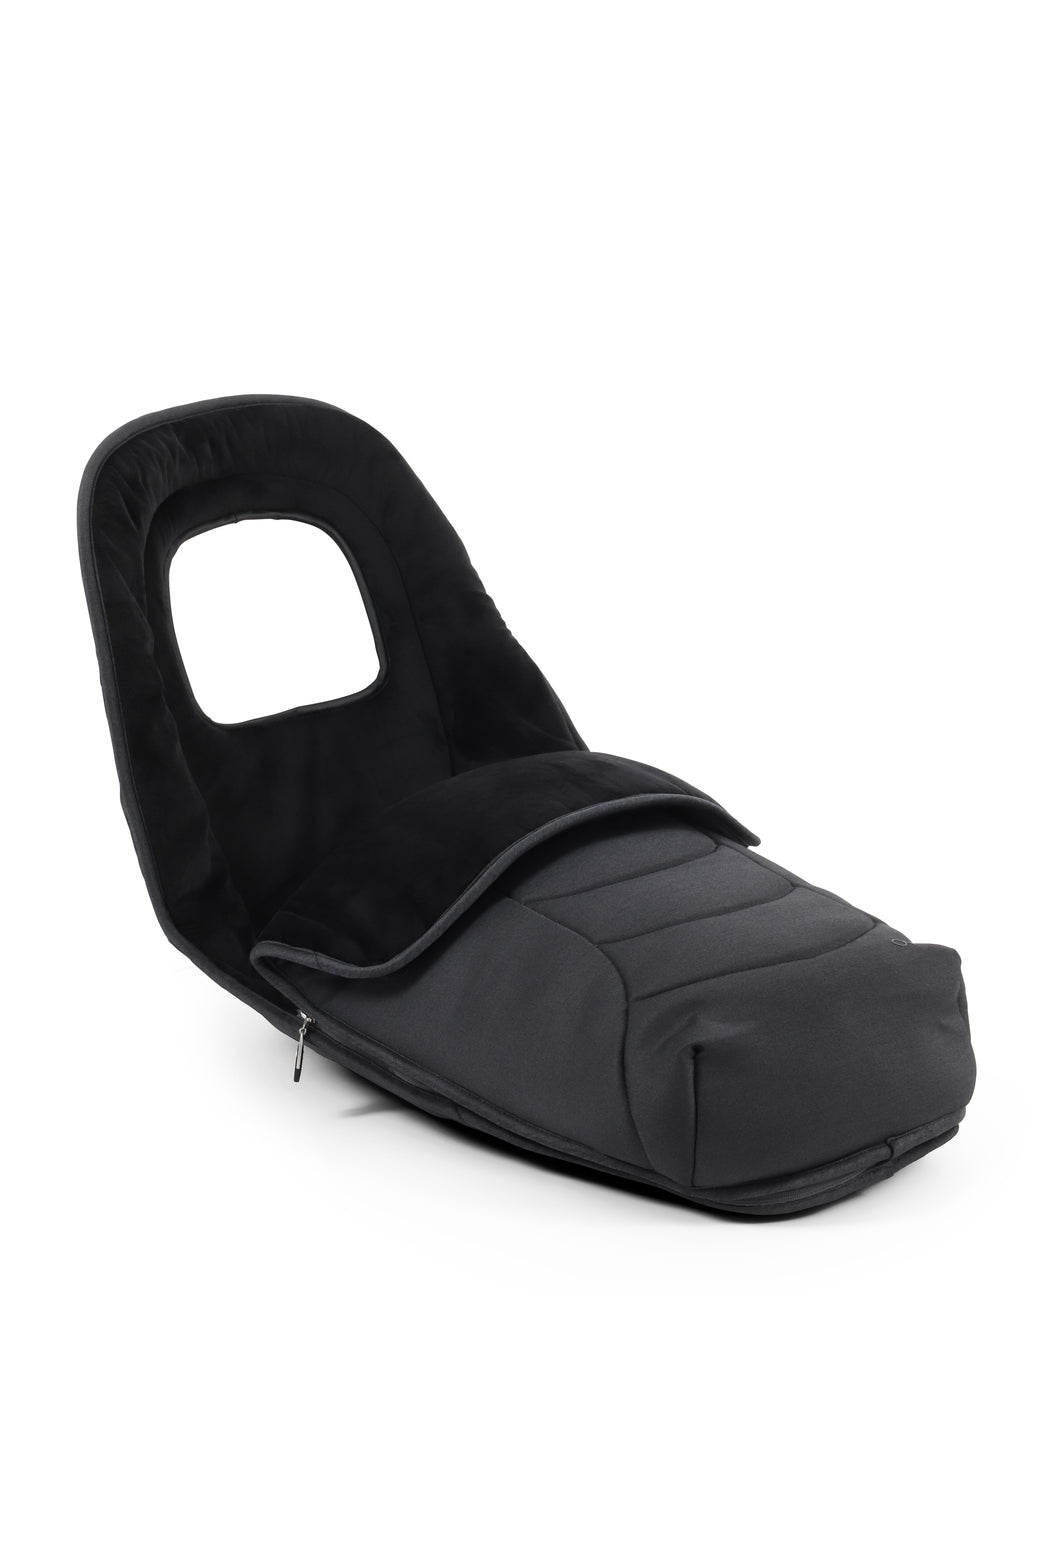 BabyStyle Oyster 3 Footmuff - Carbonite -  | For Your Little One